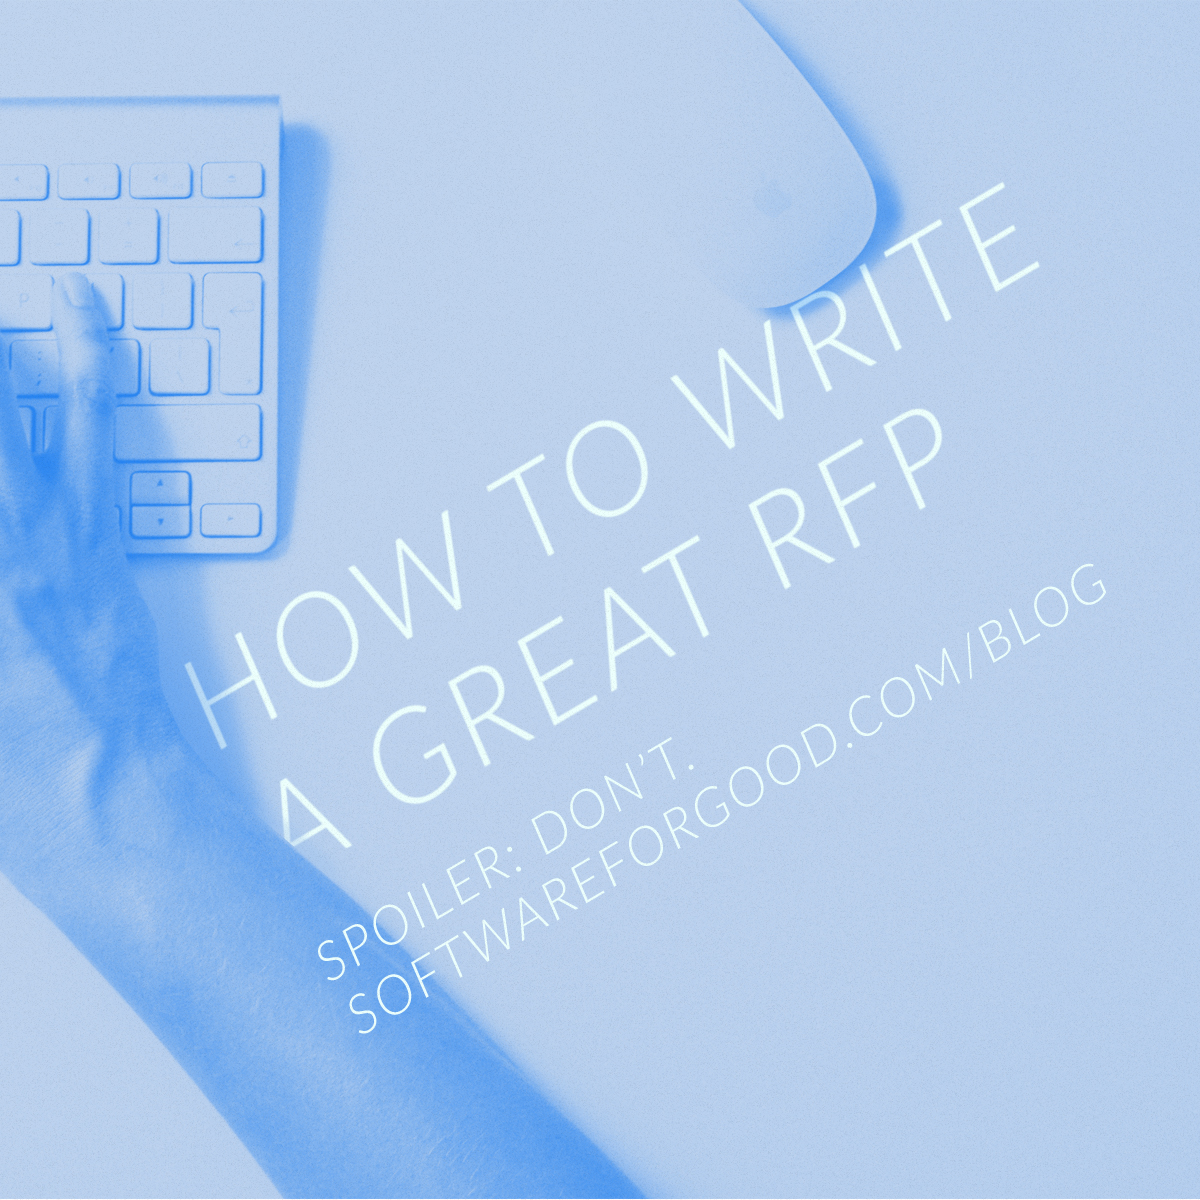 How to write a great RFP [Spoiler: Don’t]